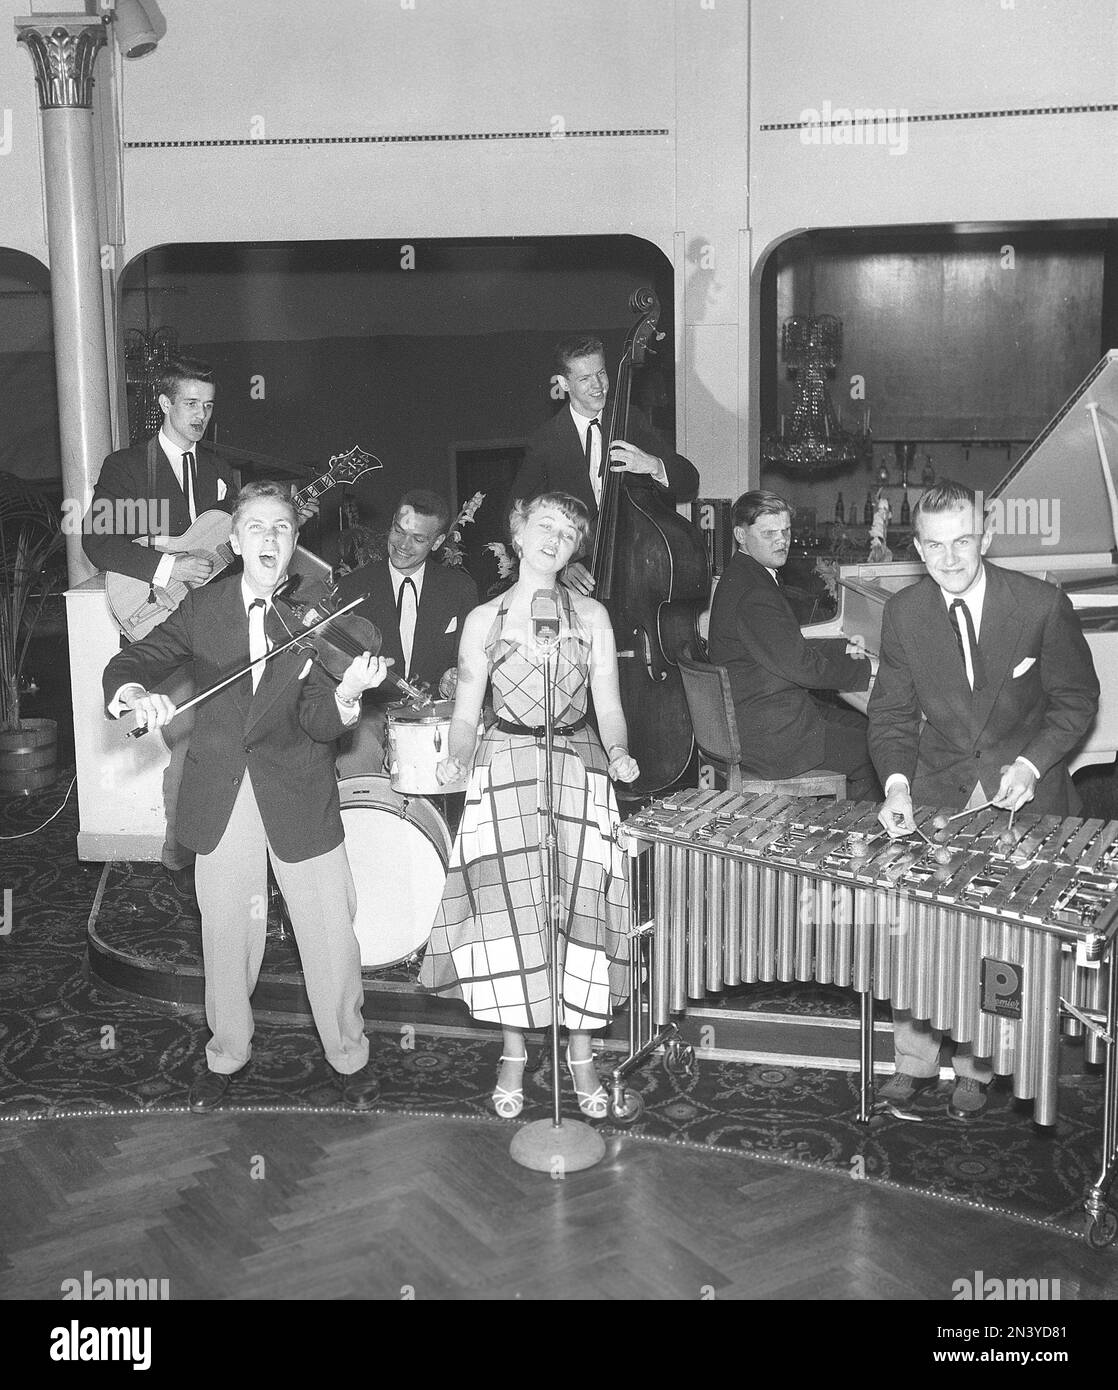 In the 1950s. A young woman seen singing on stage with a microphone in front of her at the dance establishment accompanied by an orchestra playing different musical instruments, guitar, violin, drums, piano and xylophone.  Stockholm Sweden 1954 Kristoffersson ref BP60-5 Stock Photo